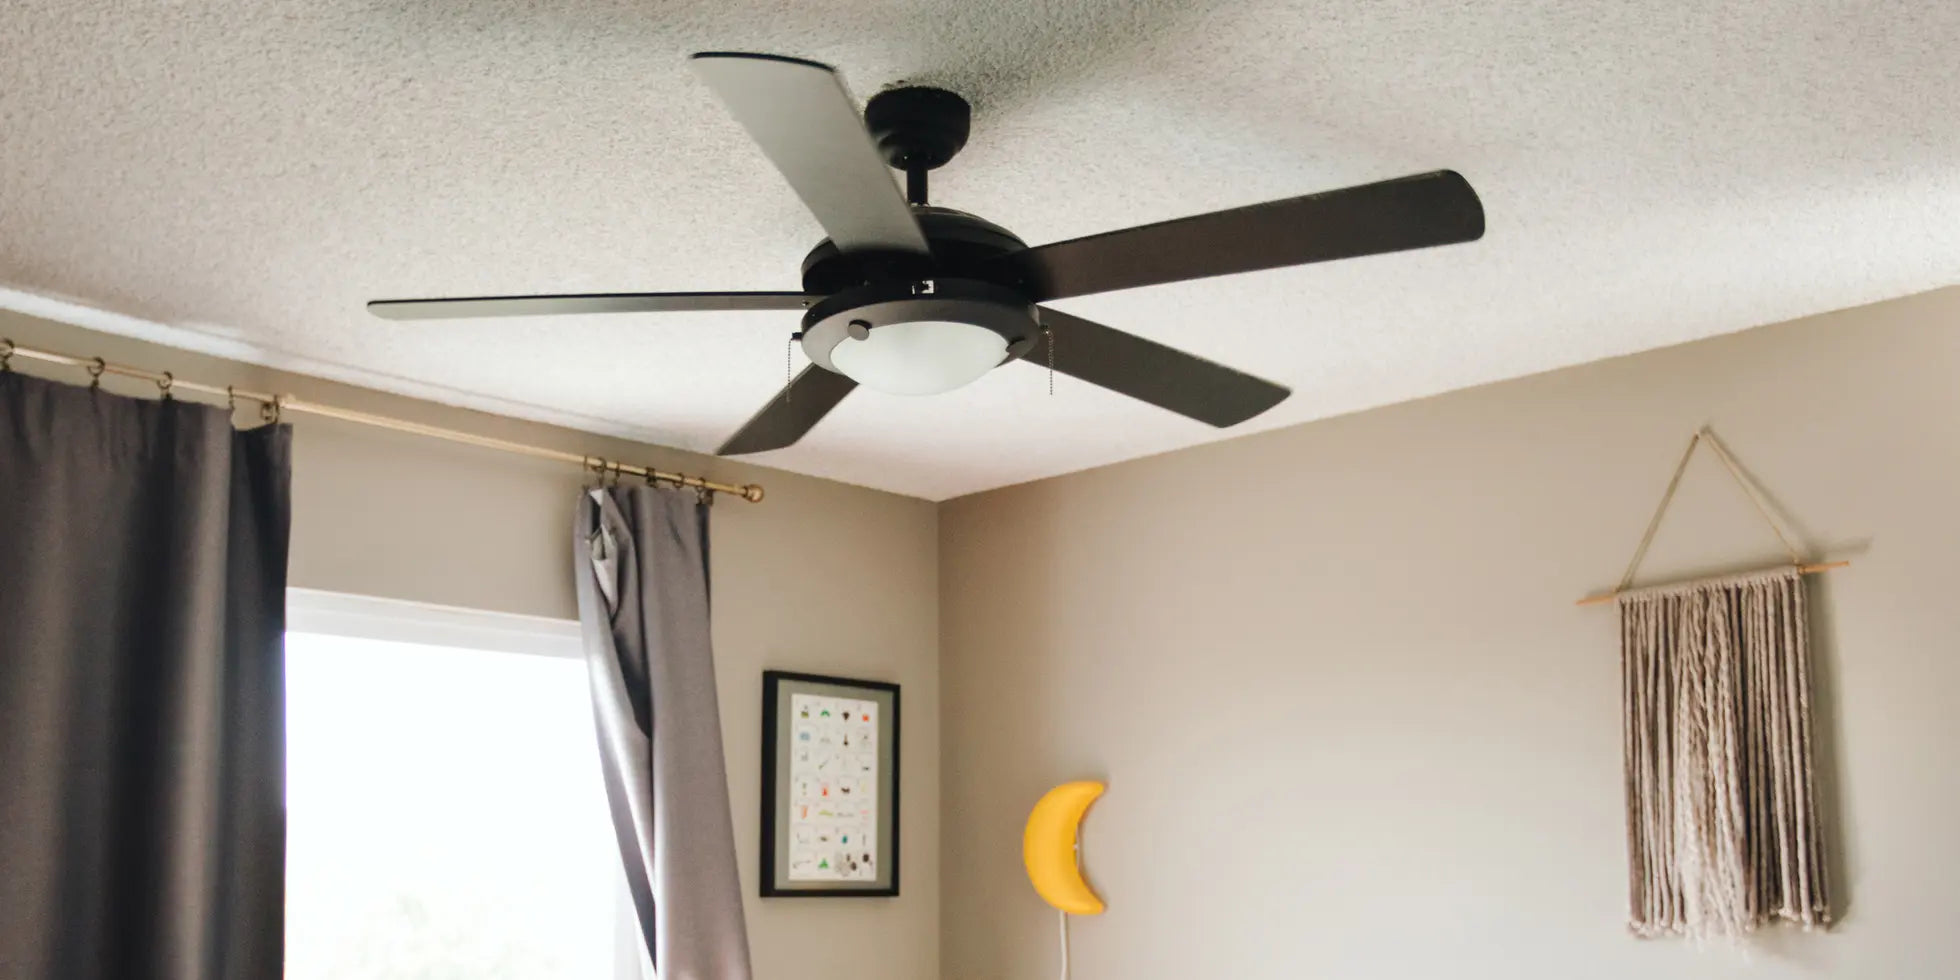 Make Your Home Smart With Smart Controls For Fans